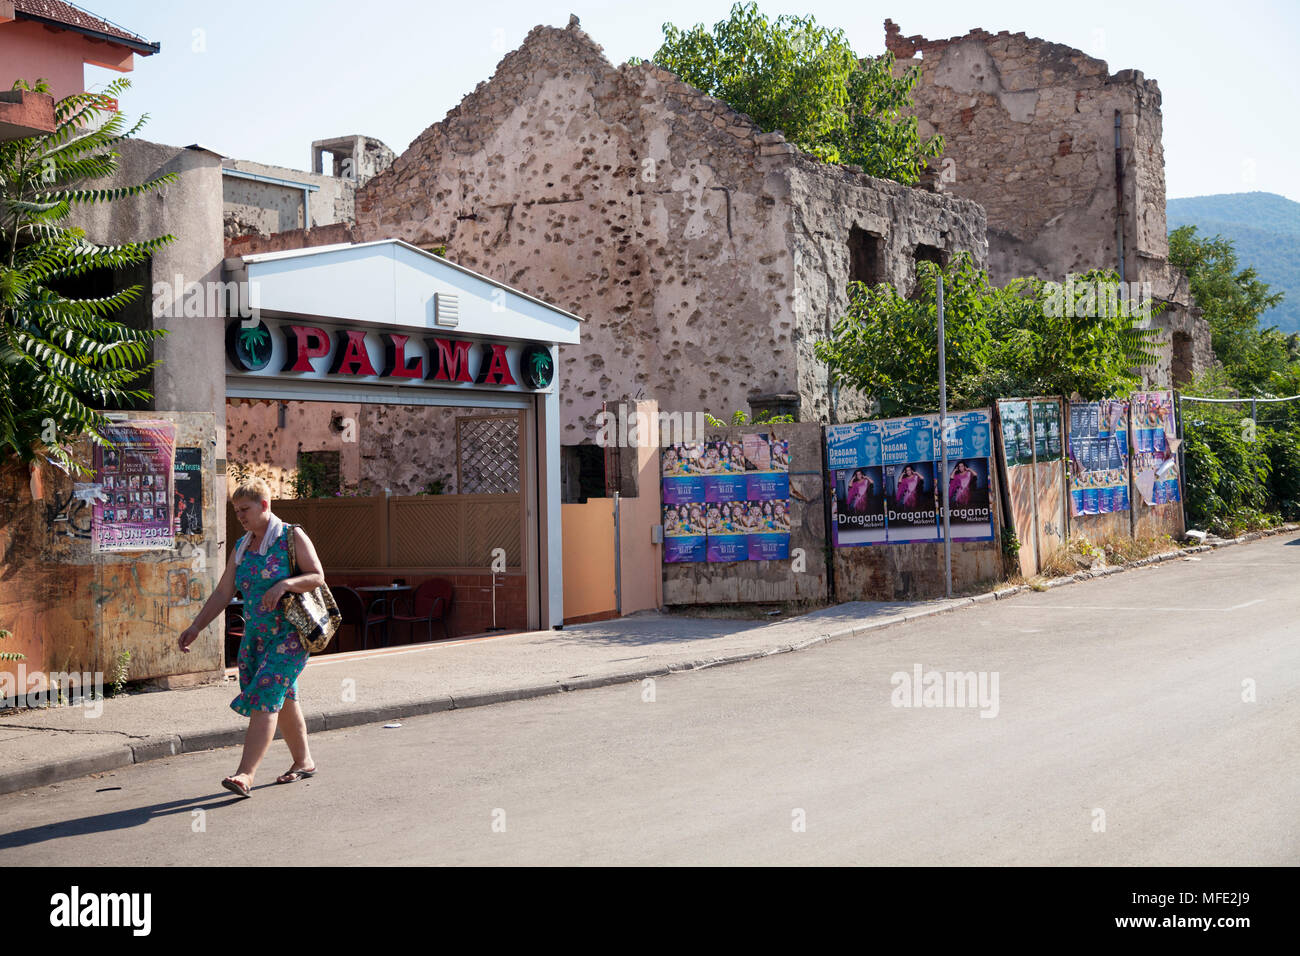 A bombed out building from the Bosnian War in Mostar, Bosnia and Herzegovina Stock Photo